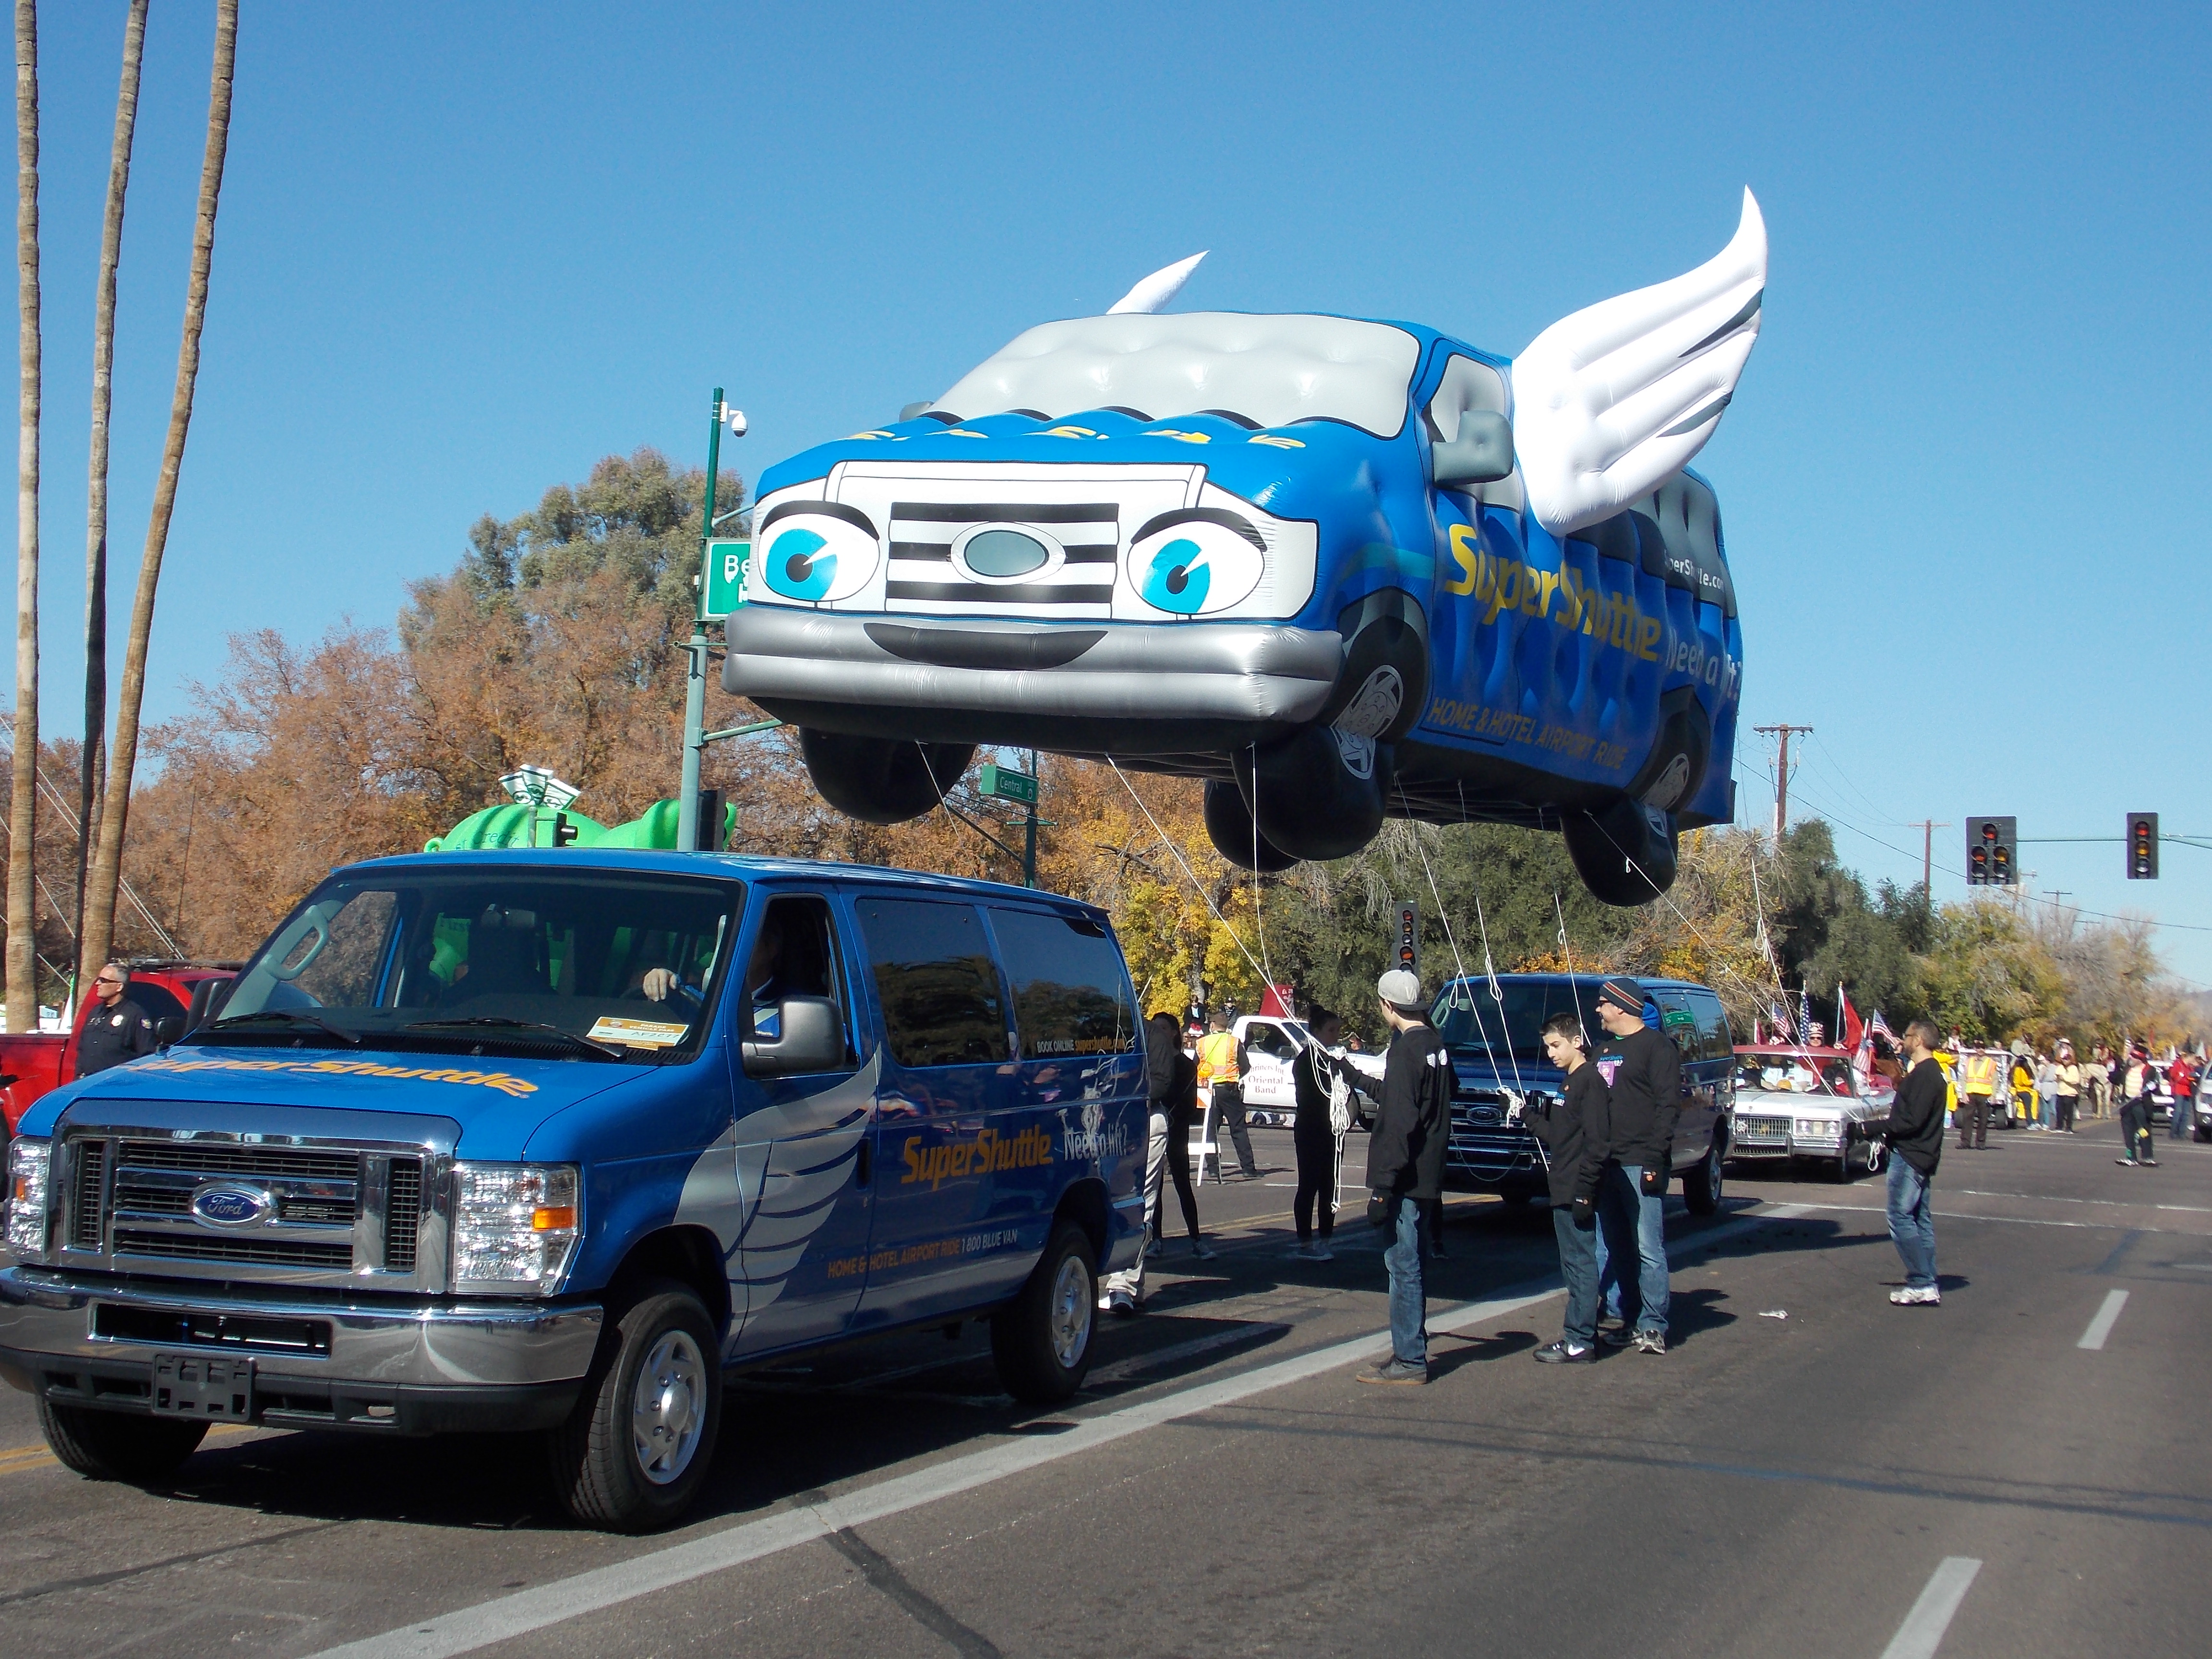 SuperShuttle parade float